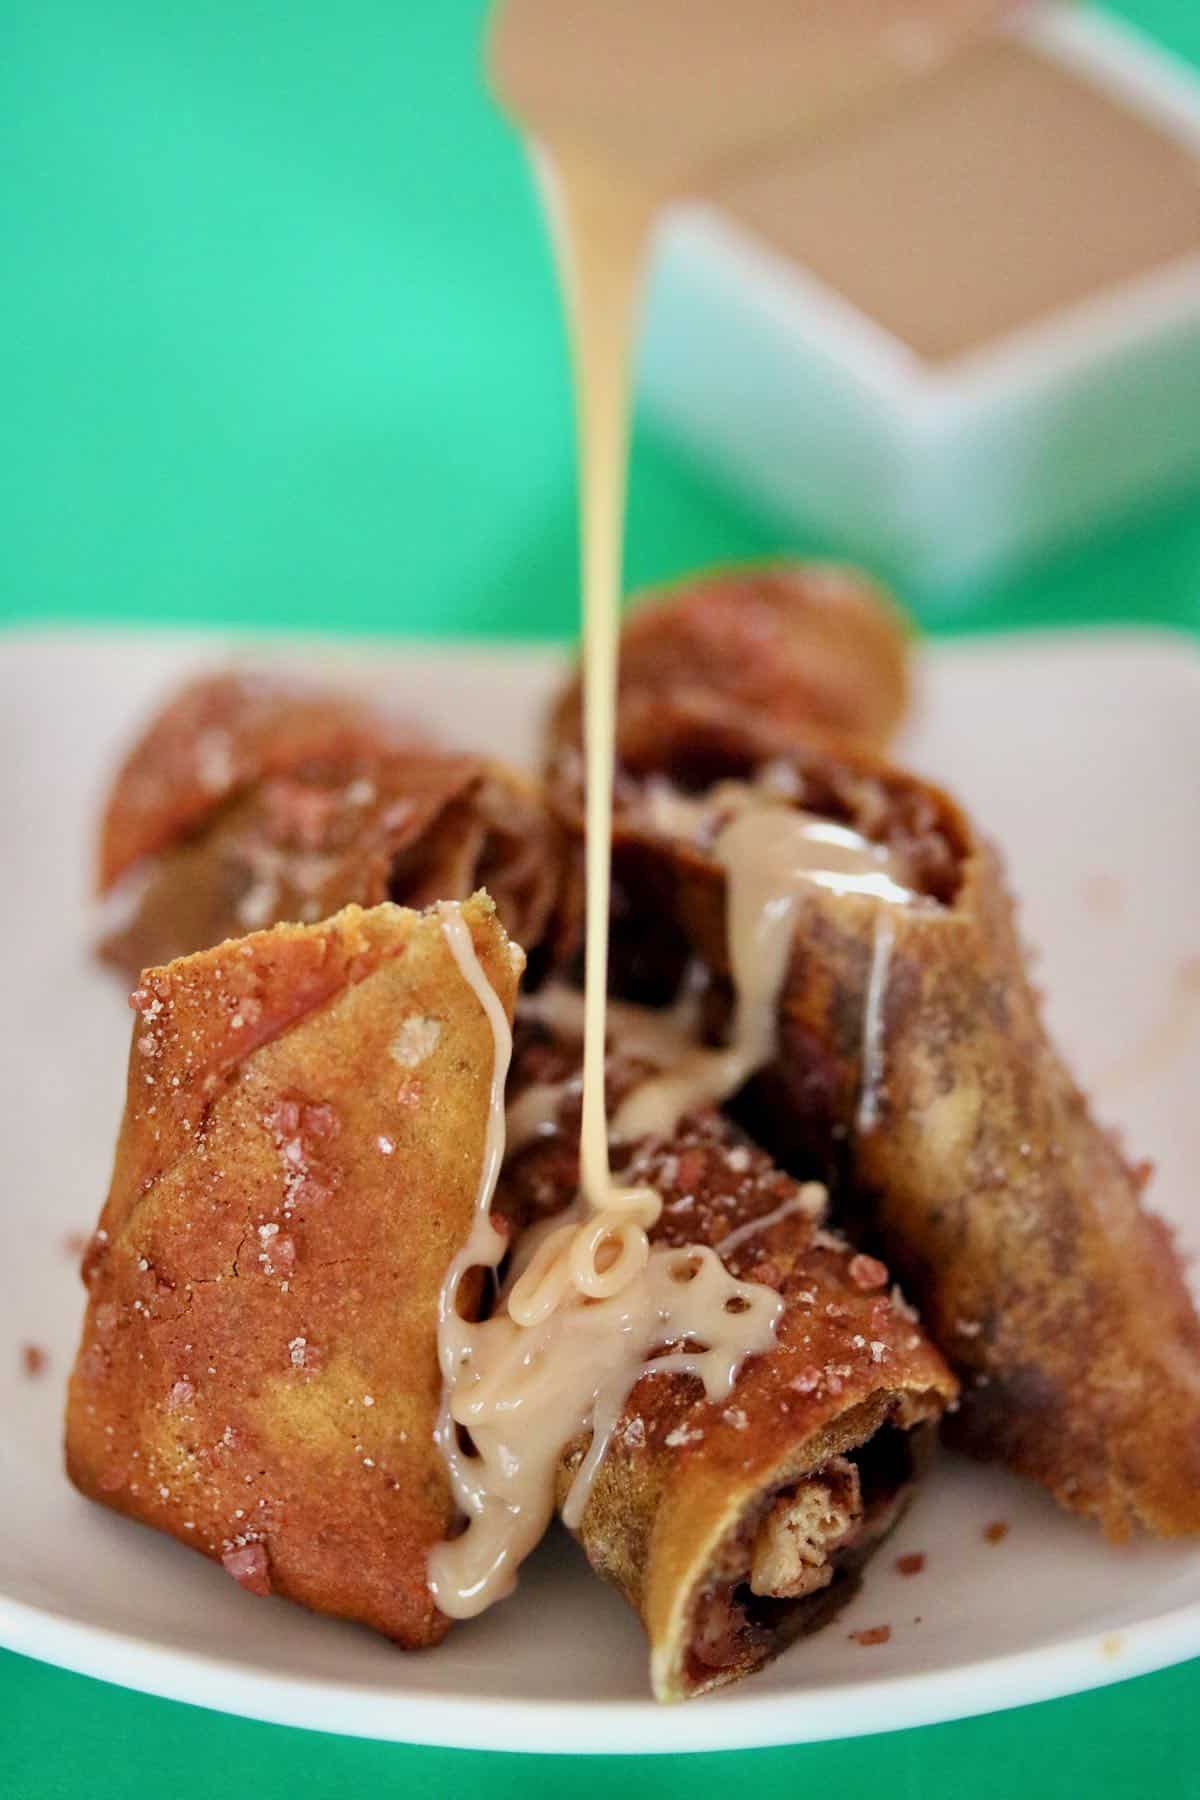 Sliced egg roll pretzels drizzled with caramel.